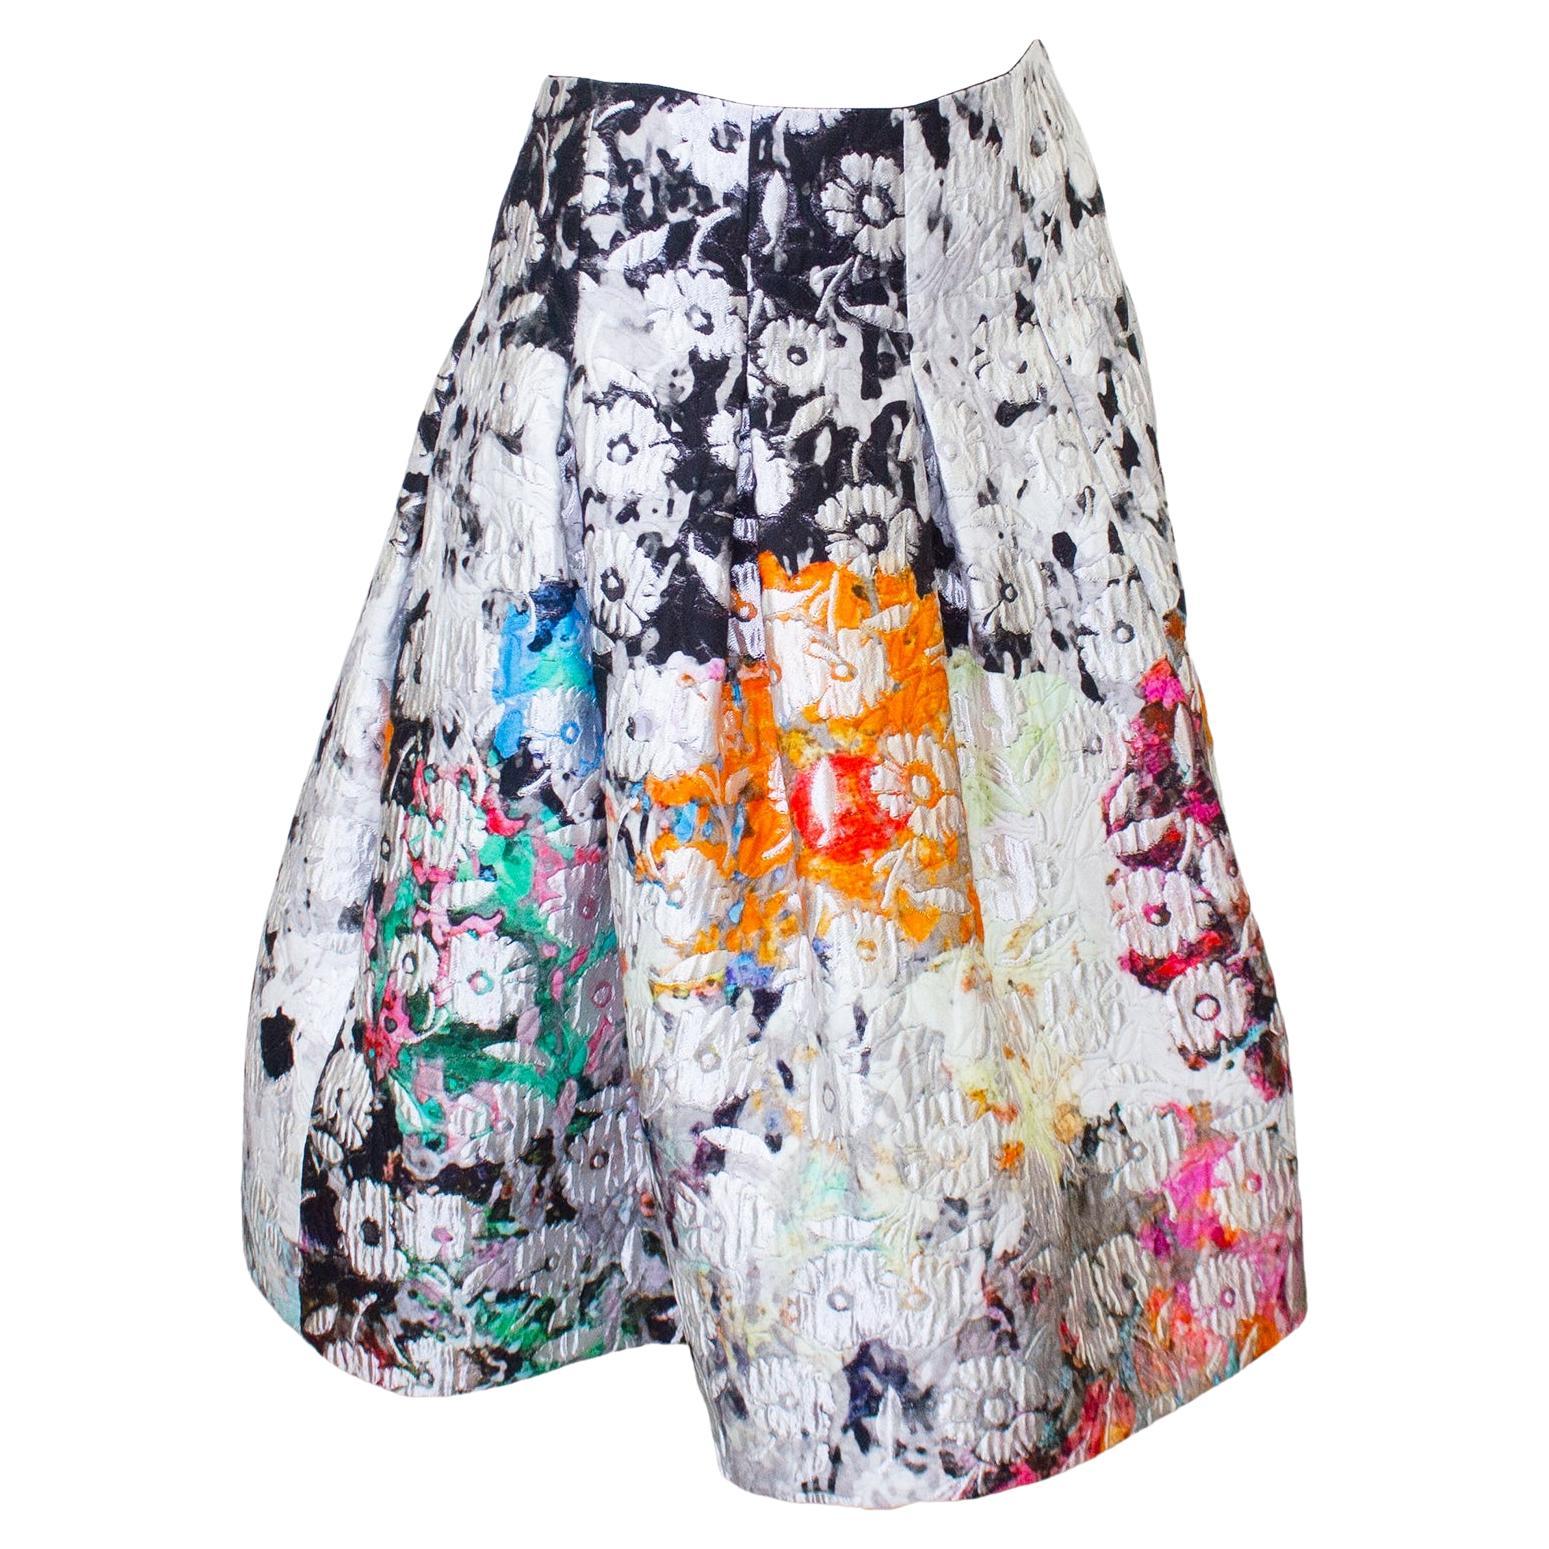 Beautiful Oscar de la Renta early 2000s watercolor flower printed skirt with inverted pleats. The skirt is fitted at the waist and flares out at the hips. The fabric is a nylon, cotton and poly blend and the skirt is fully lined in black silk.